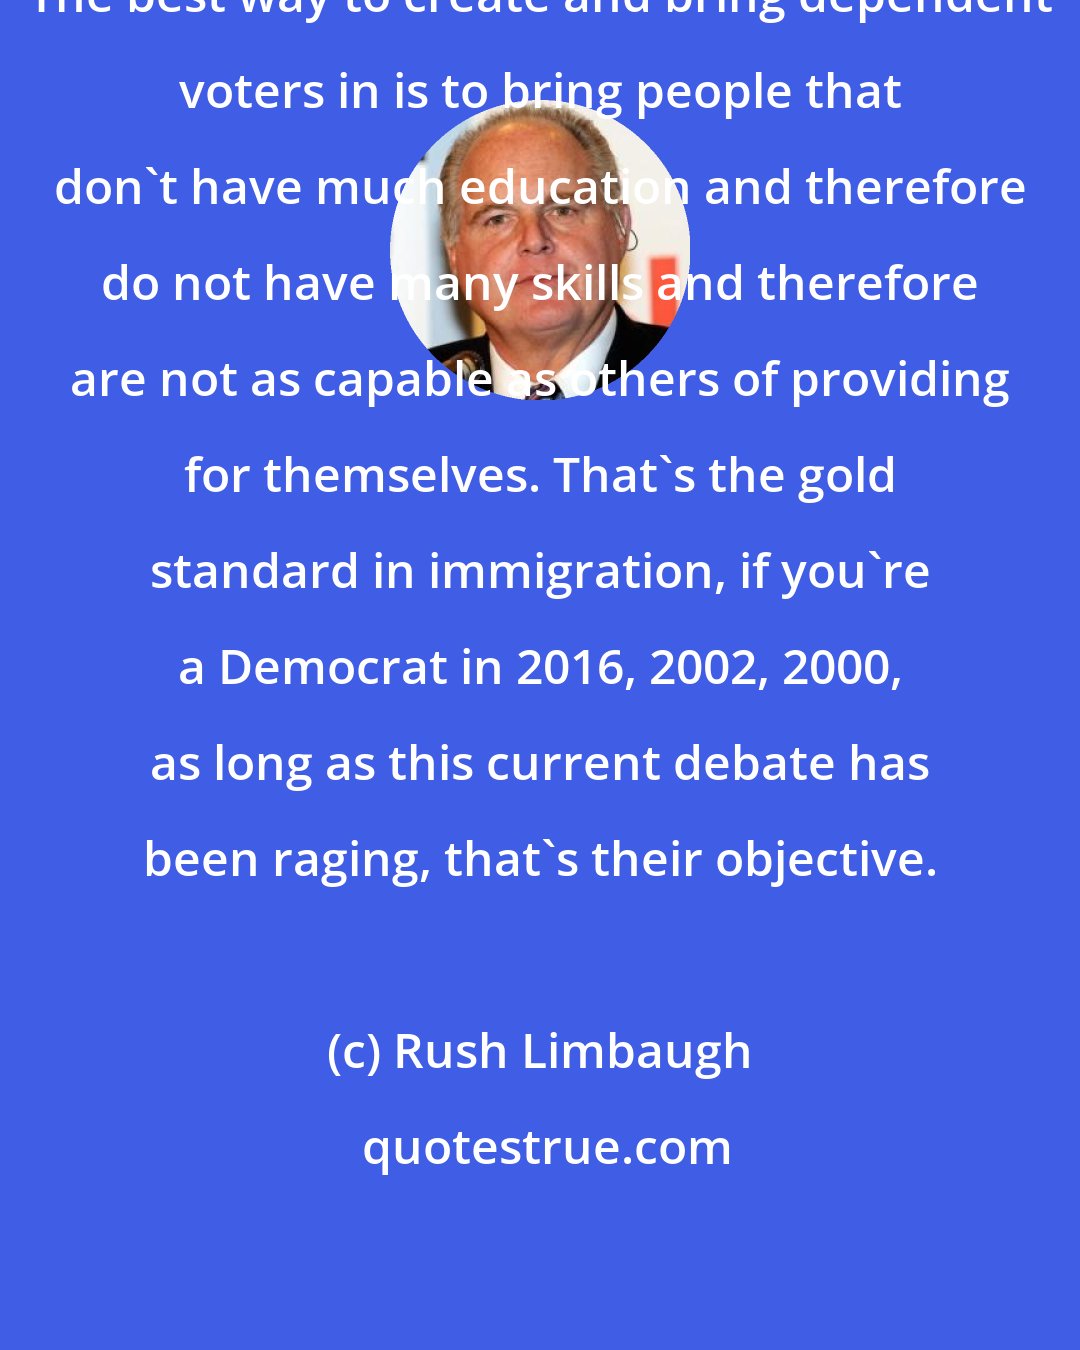 Rush Limbaugh: The best way to create and bring dependent voters in is to bring people that don't have much education and therefore do not have many skills and therefore are not as capable as others of providing for themselves. That's the gold standard in immigration, if you're a Democrat in 2016, 2002, 2000, as long as this current debate has been raging, that's their objective.